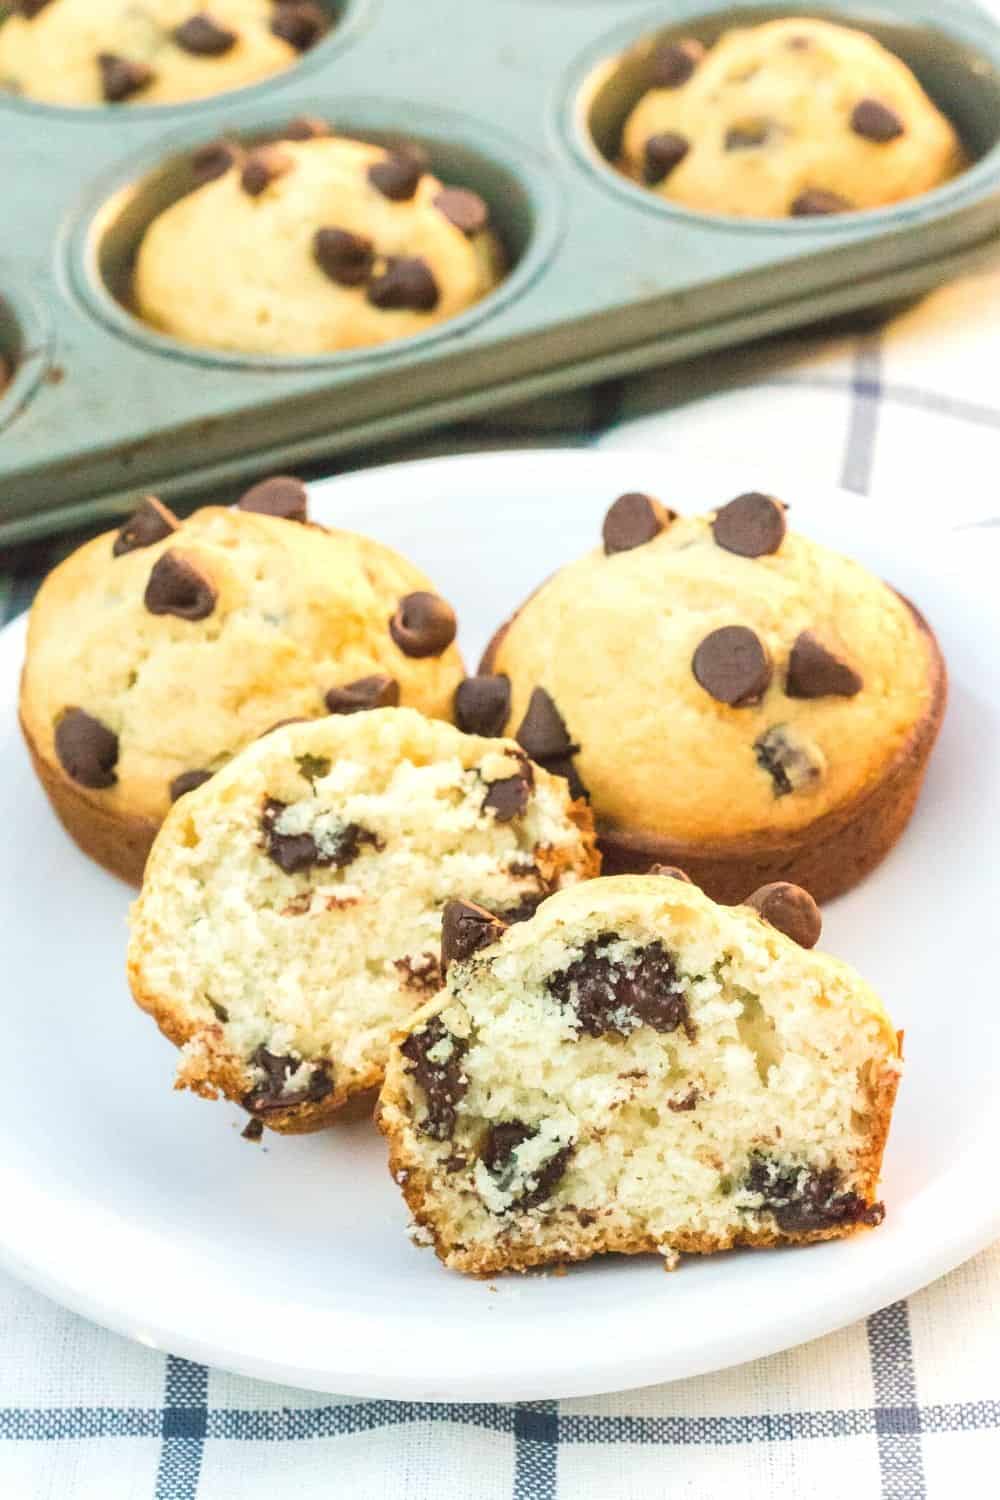 three chocolate chip muffins made with bisquick on a white plate, with one muffin cut in half